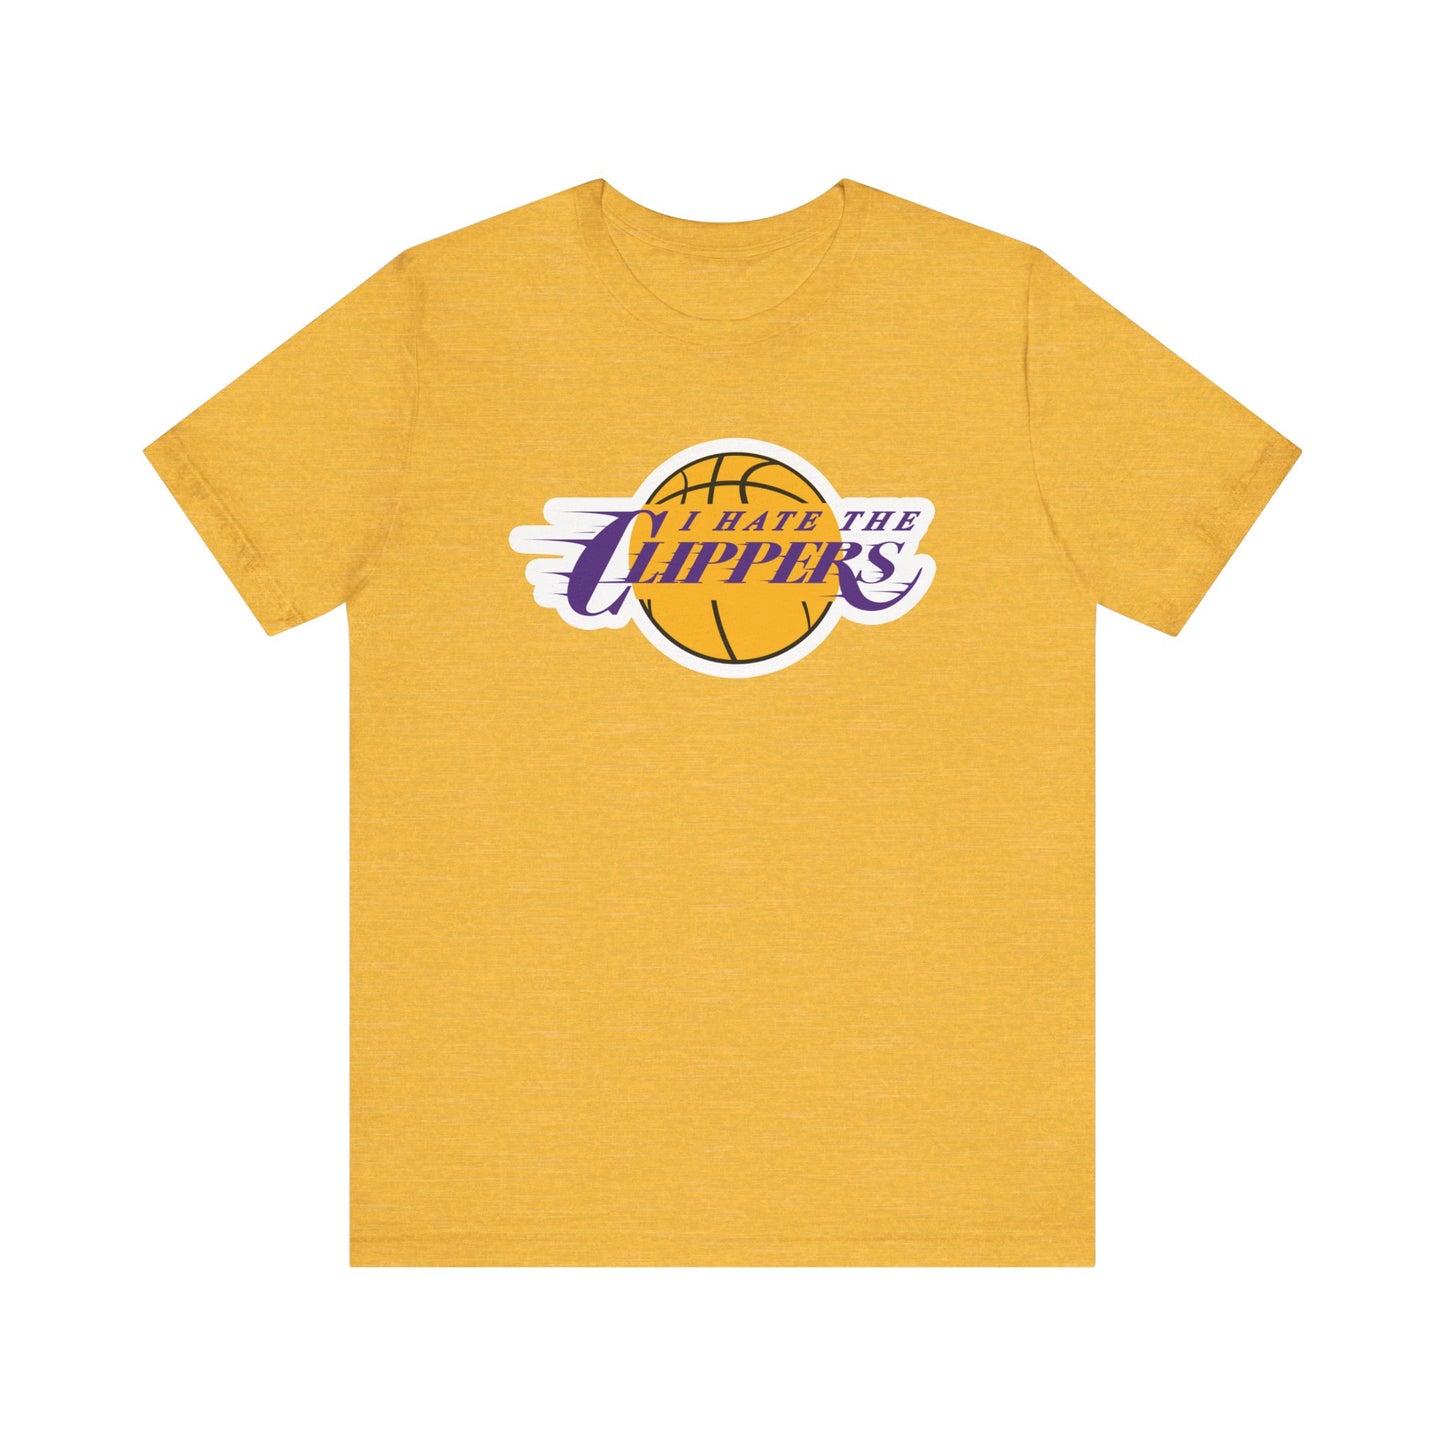 I Hate The Clipps (for Lake Show fans) - Unisex Jersey Short Sleeve Tee